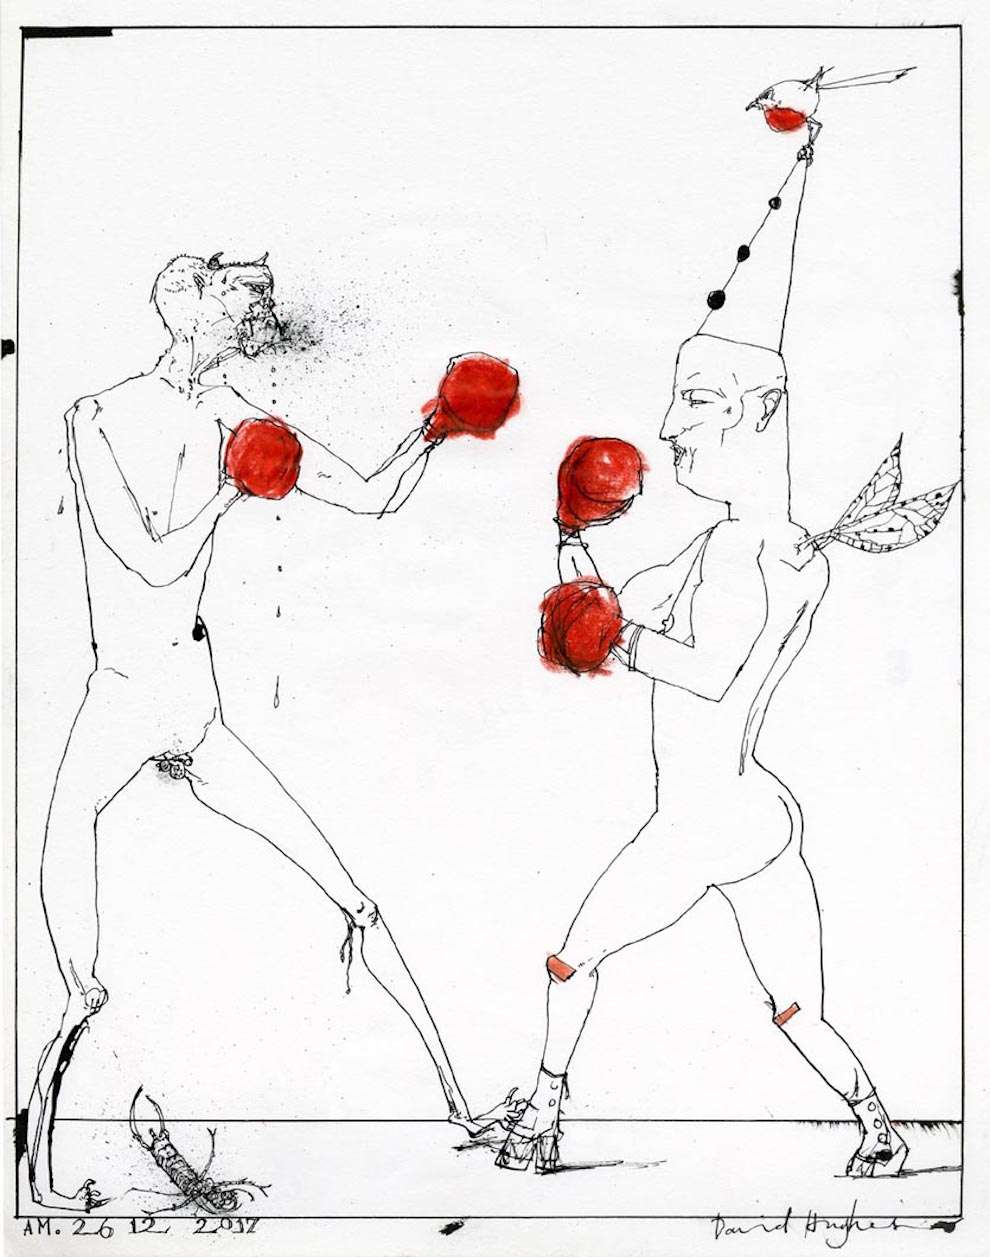 David Hughes, Hand-drawn line illustration of a boxing match between a man with a satan's head and another man with a birthday hat and fairies wings. 